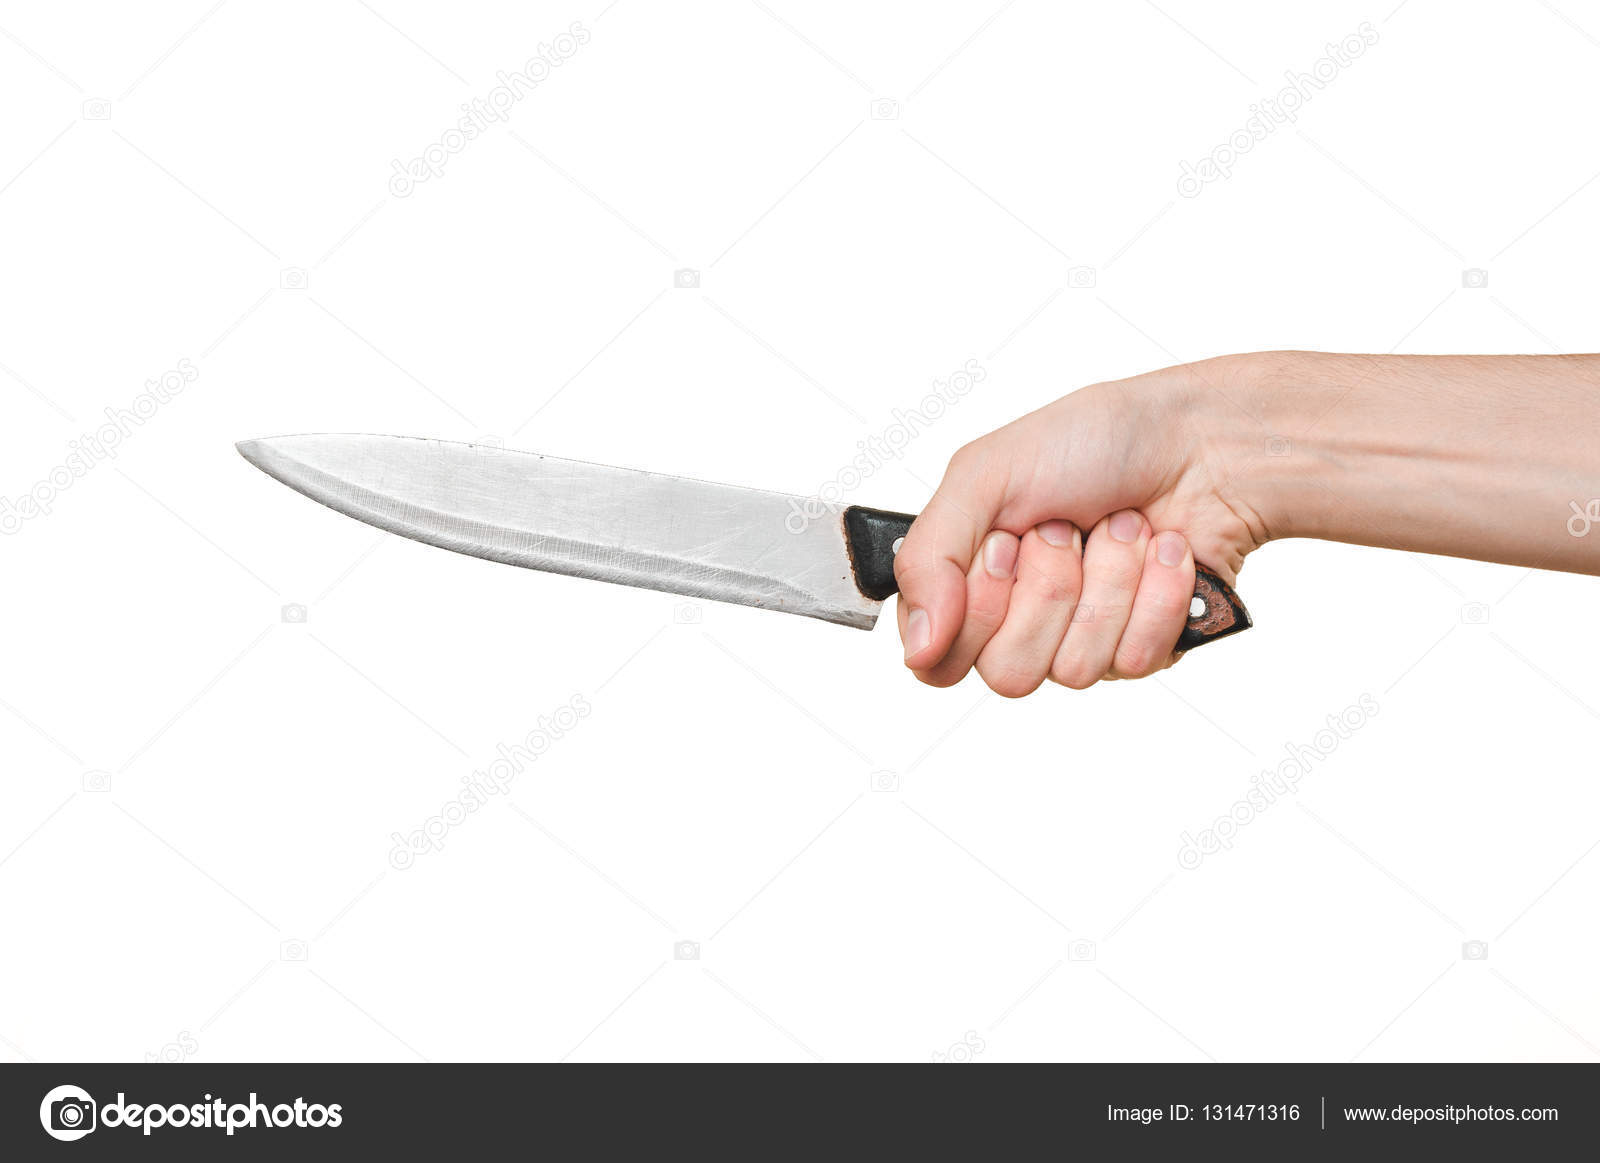 Male arm holding big knife in threatening position on wide white ...